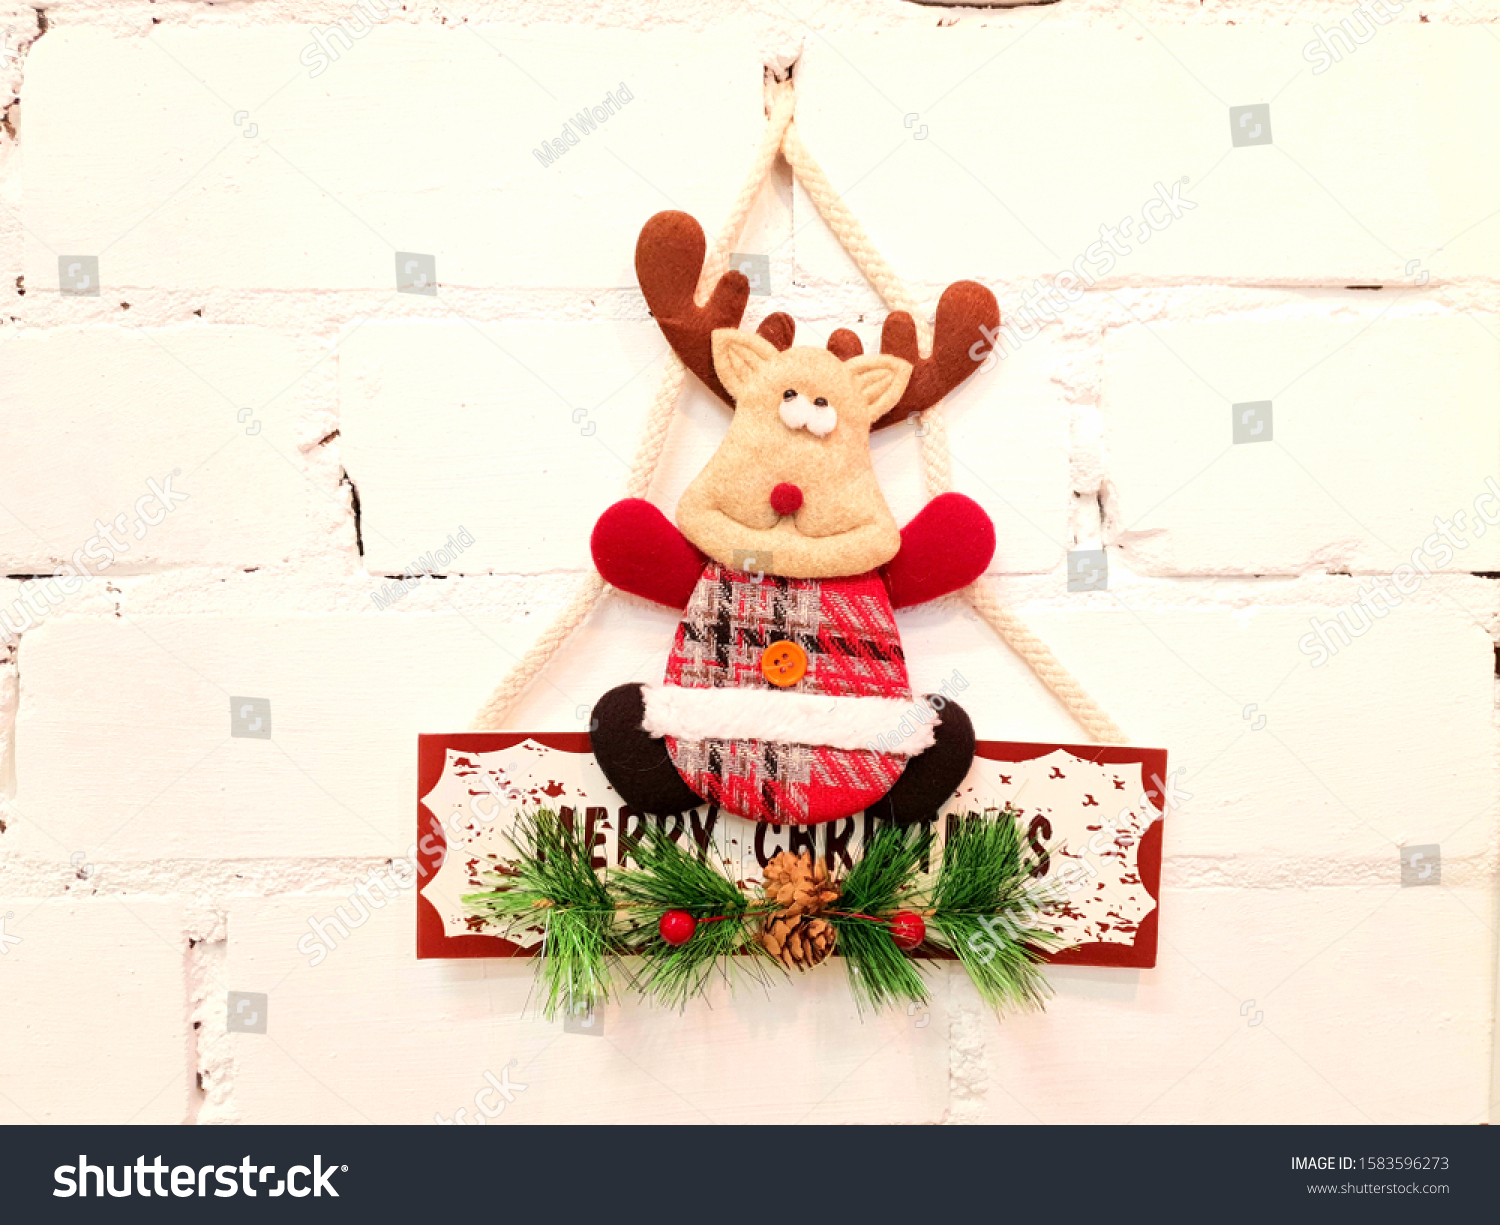 Deer, toys, inscription and Christmas holiday decorations. The decorations are attached to the wall in white and serve as decoration in the interior of the house. #1583596273